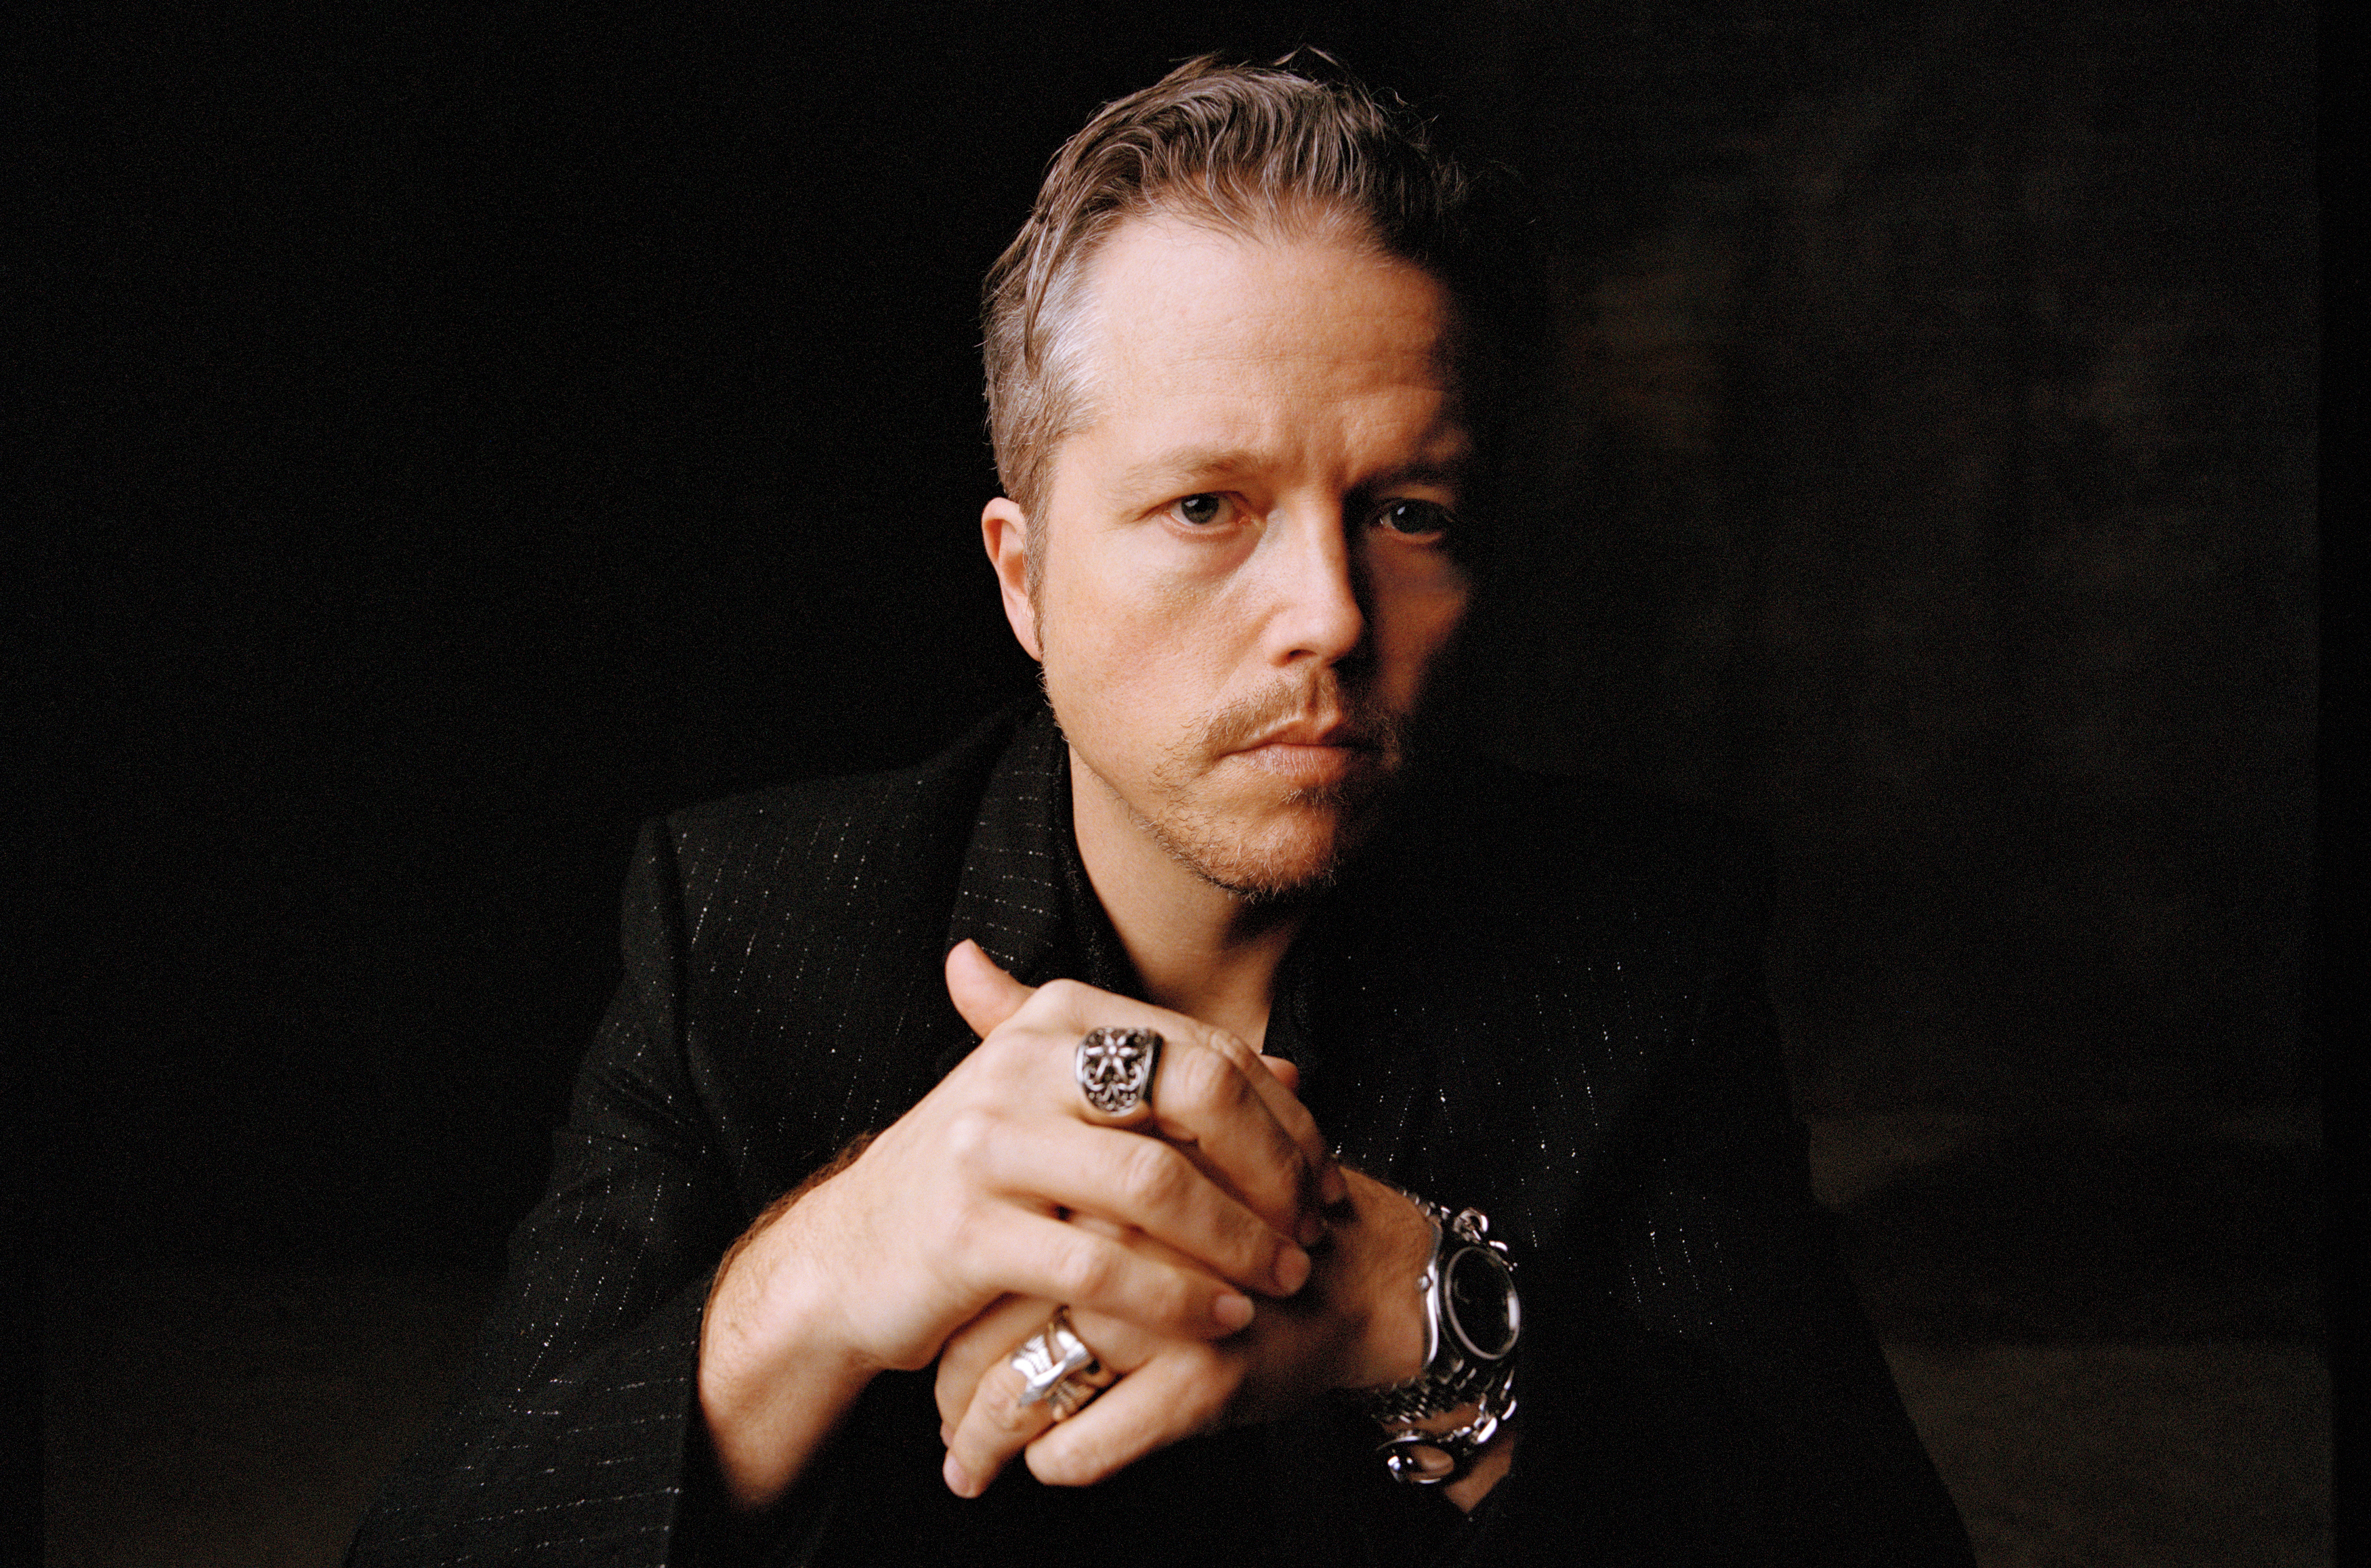 Jason Isbell On The Past Lives That Inspired His New Album, 'Reunions